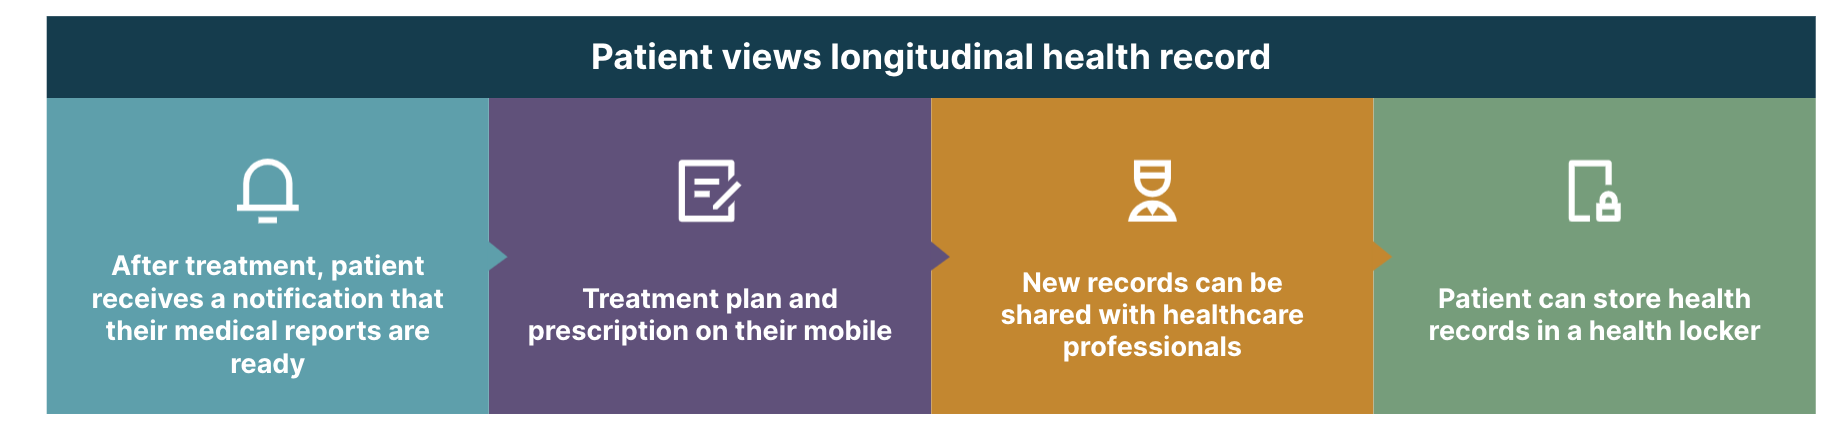 Patient-centric view of the national digital health mission